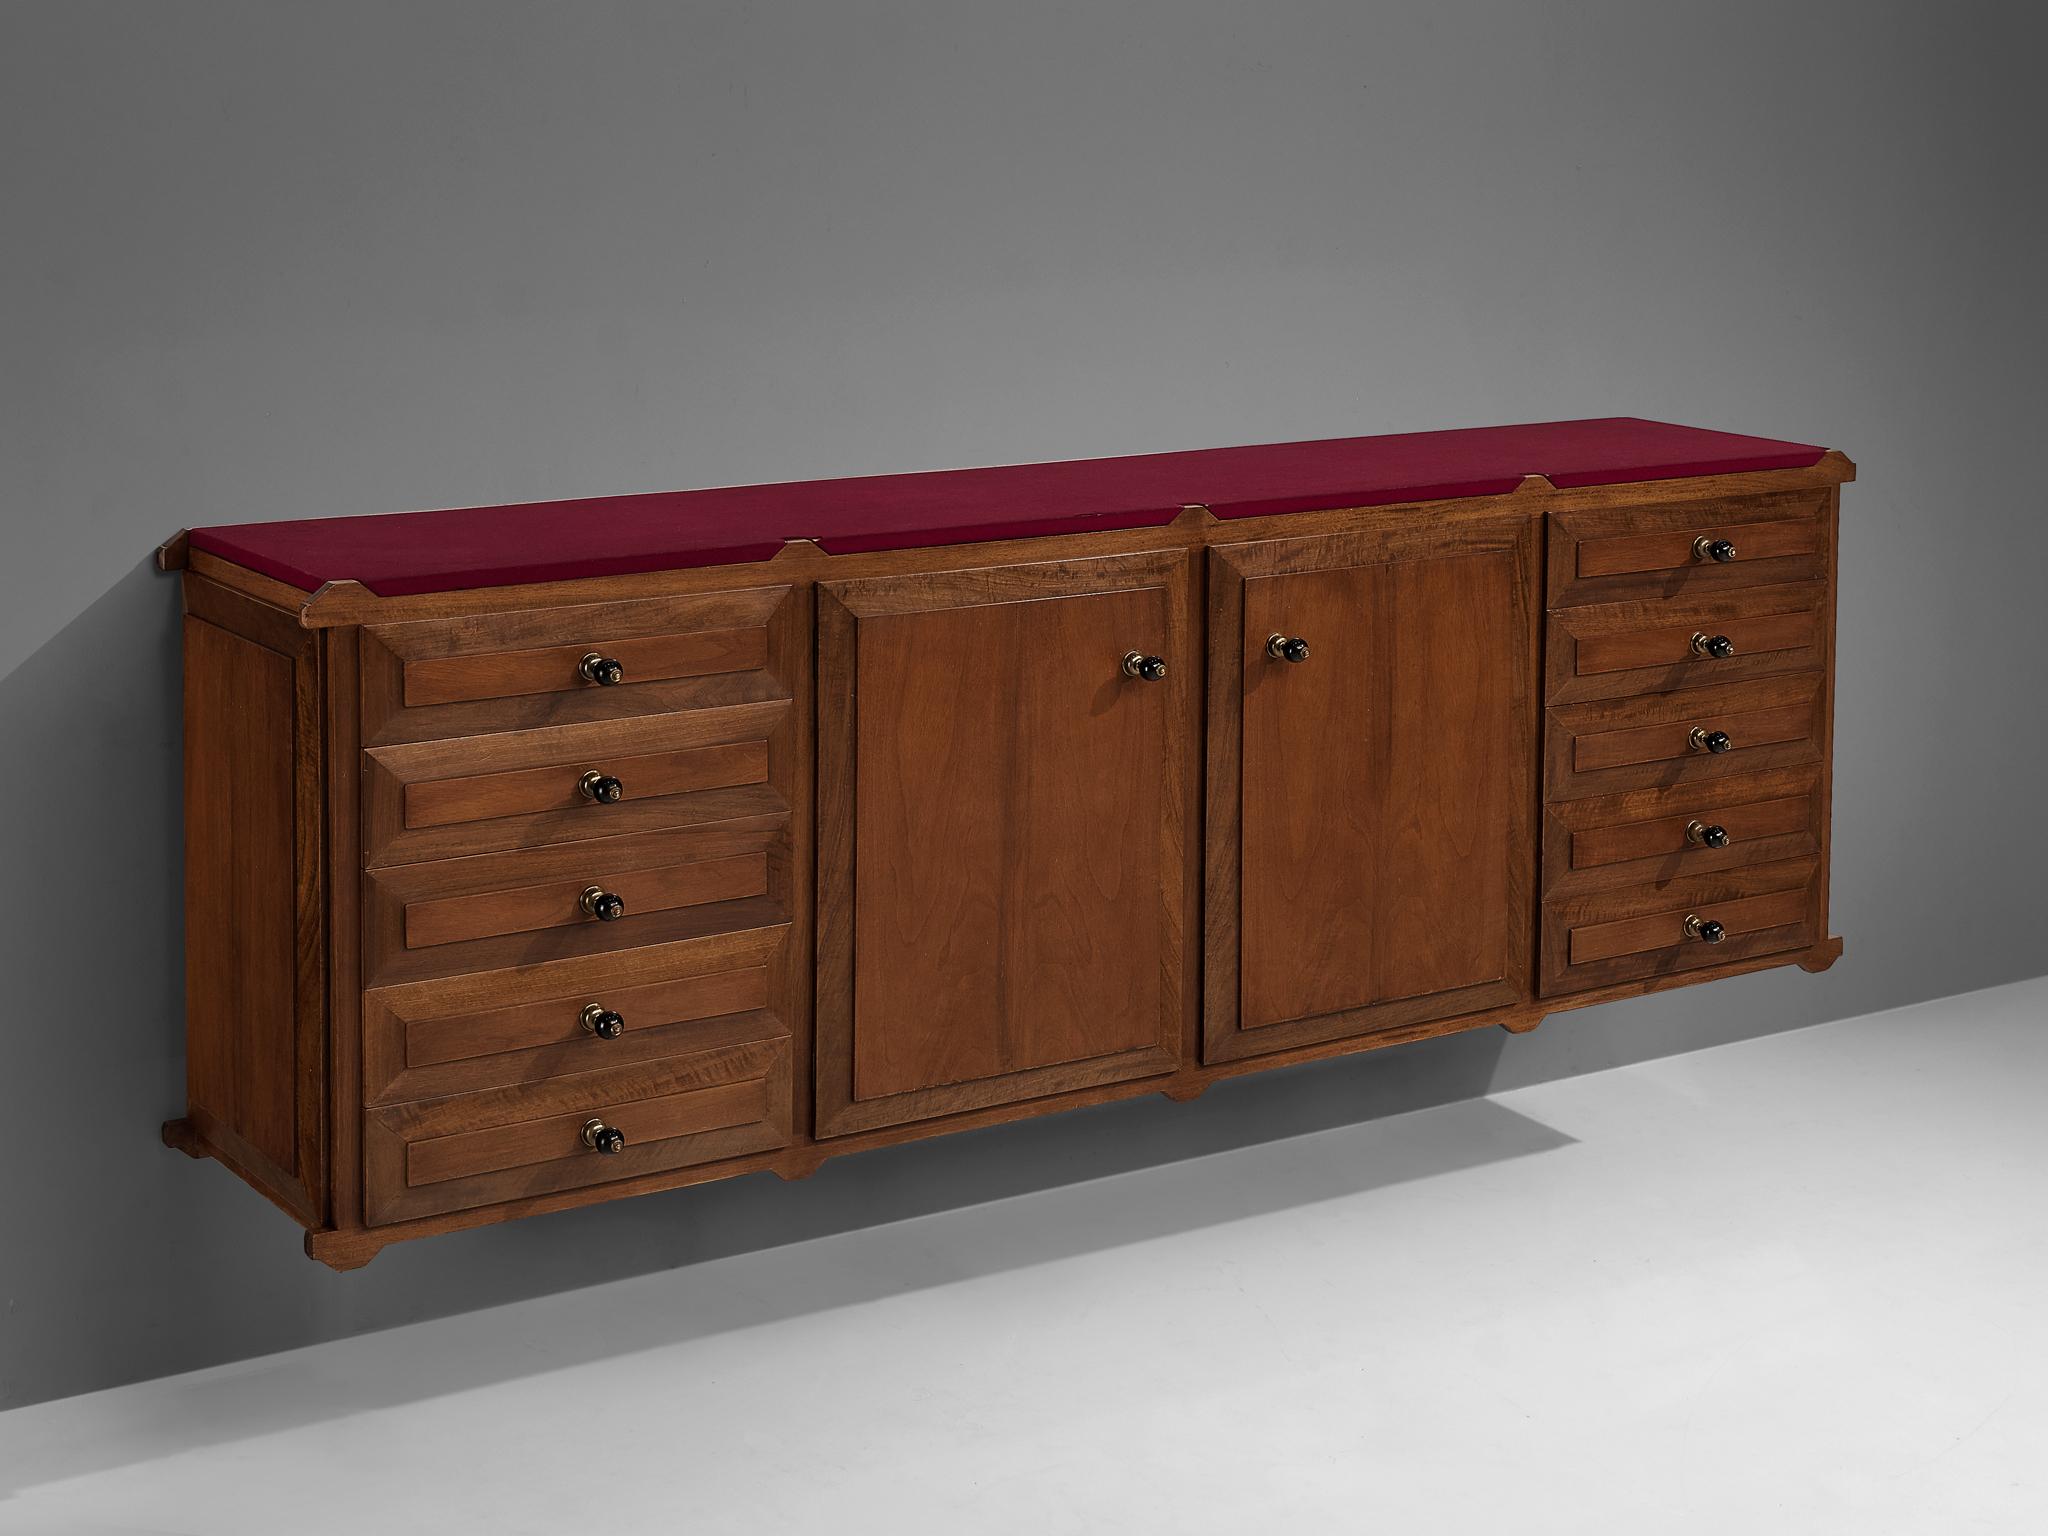 Sideboard, walnut, brass, felt, 1950s

Luxurious credenza finished with elegant brass handles. The sideboard has six drawers on each side and two doors in the middle that provide plenty of storage space. On the inside, the drawers and doors are